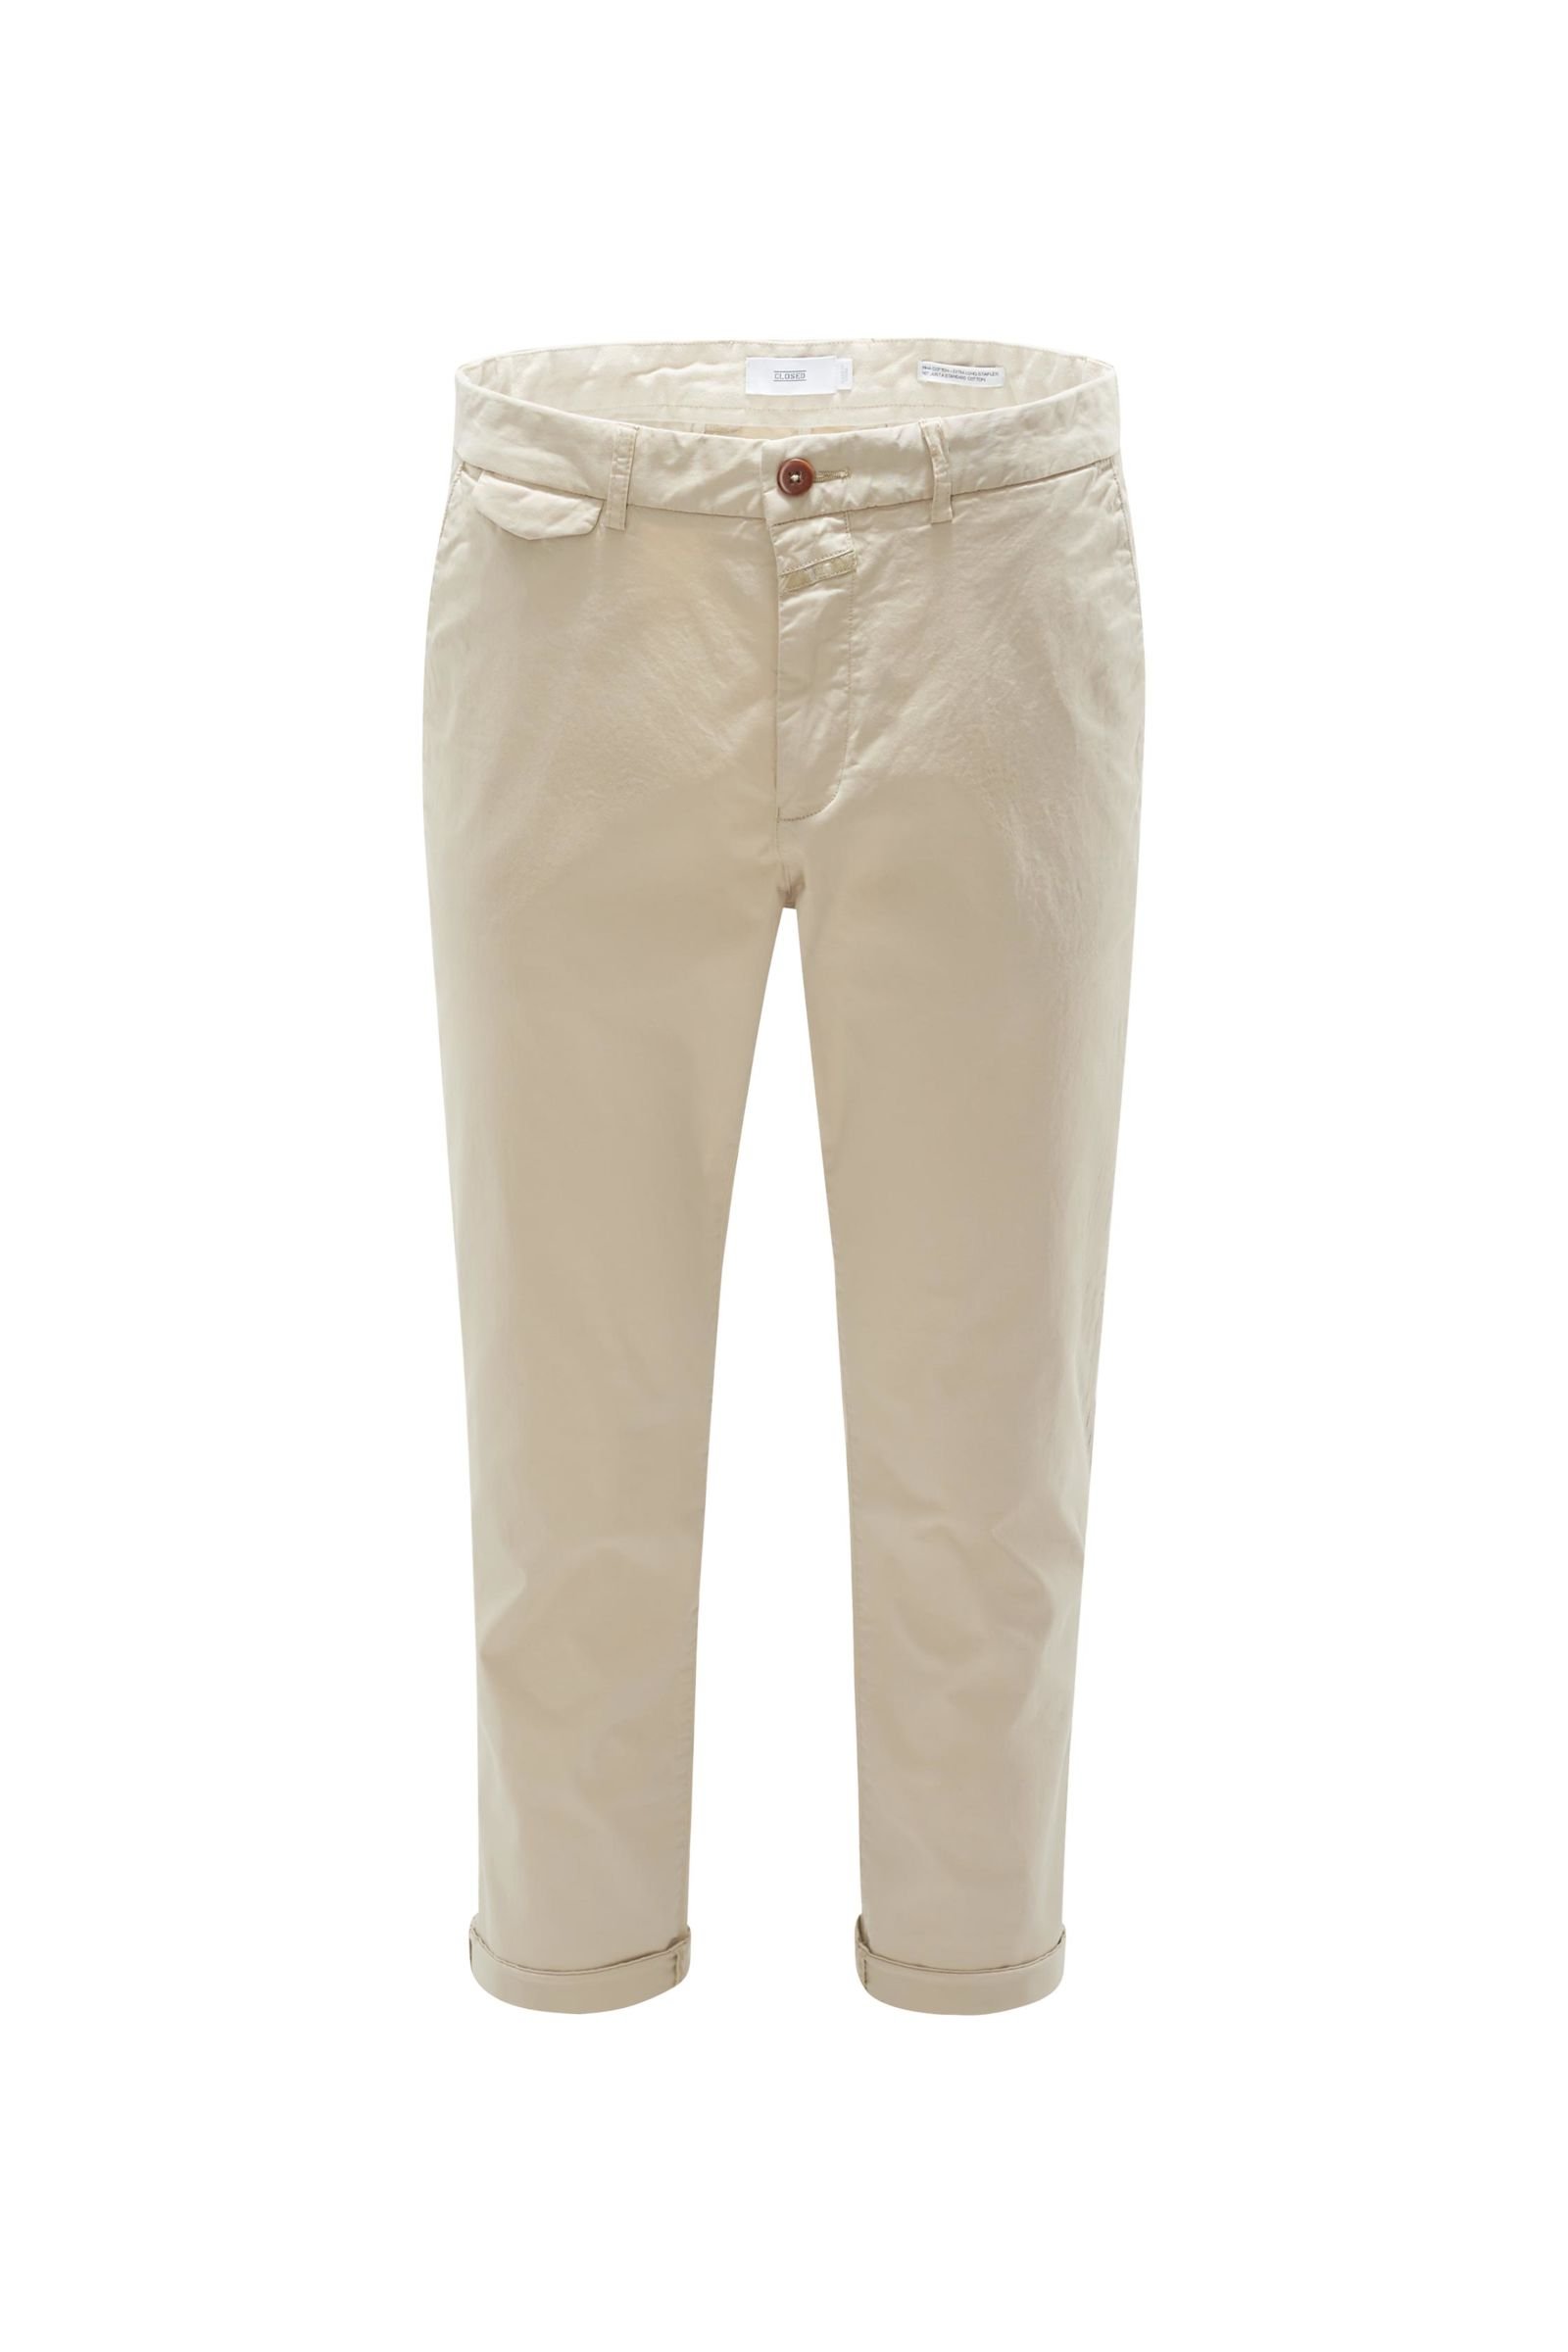 Chino 'Atelier Cropped' beige